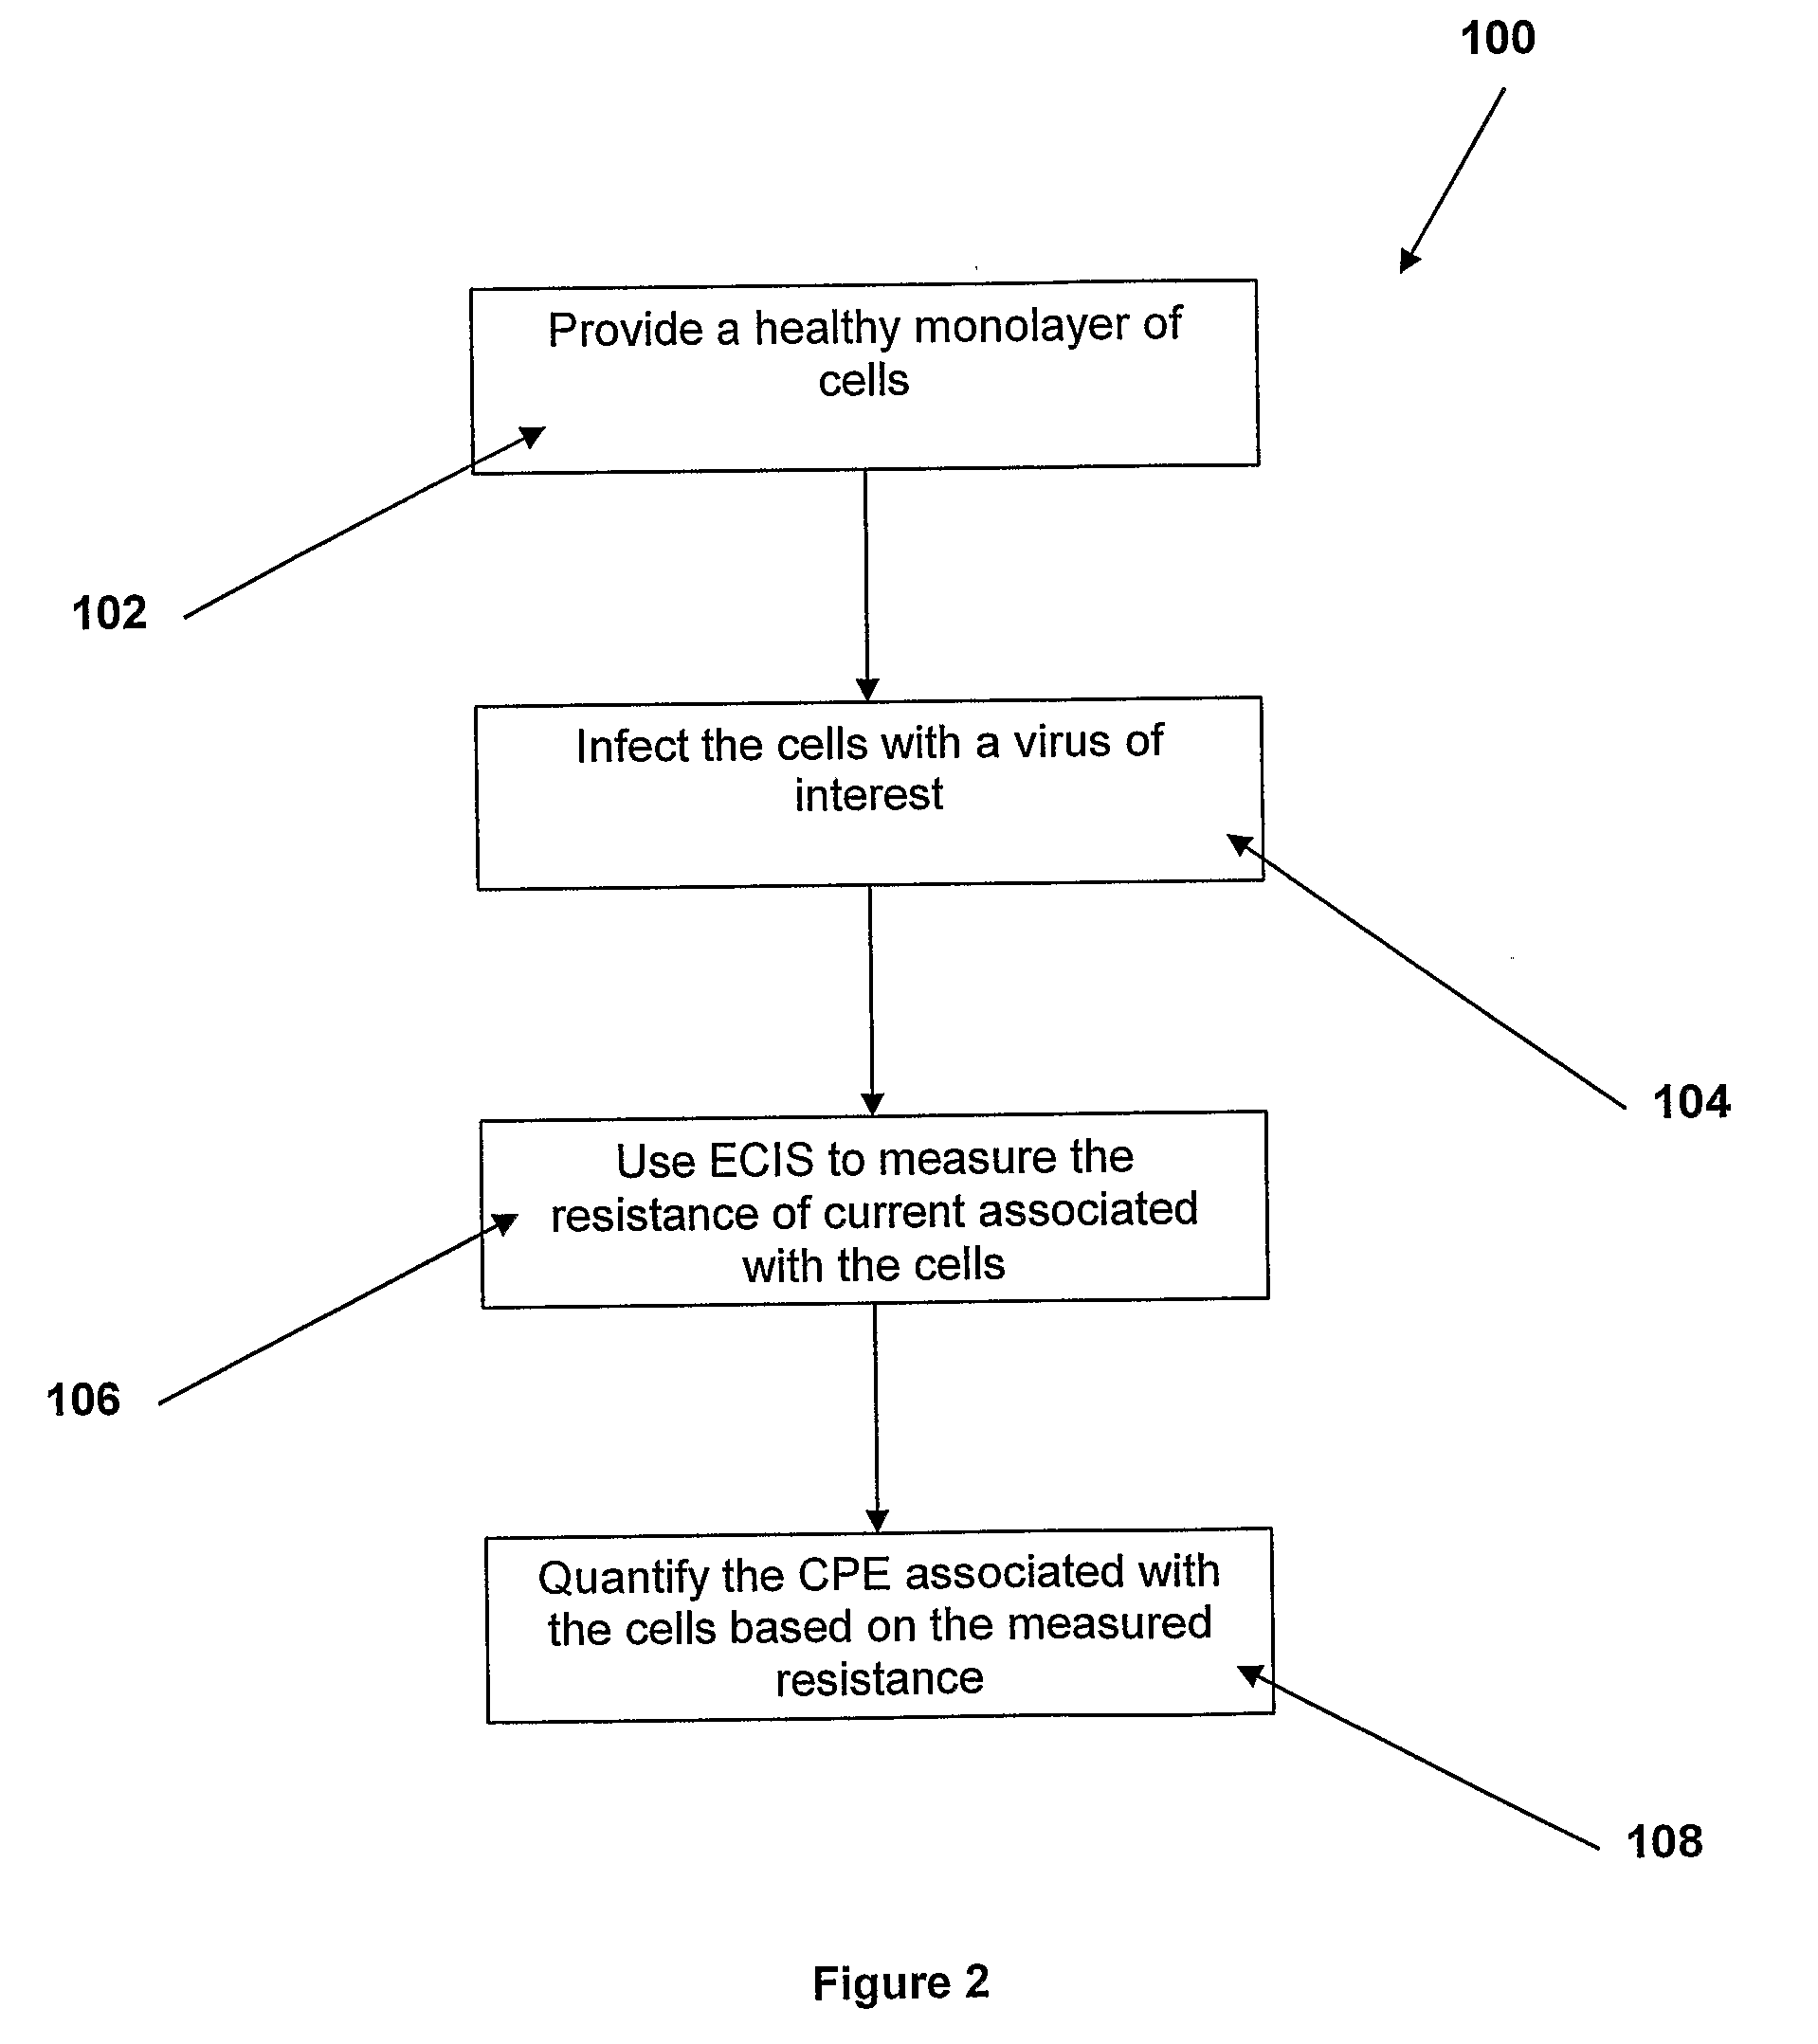 Method for Measuring Cytopathic Effect Due to Viral Infection in Cells Using Electric Cell-Substrate Impedance Sensing